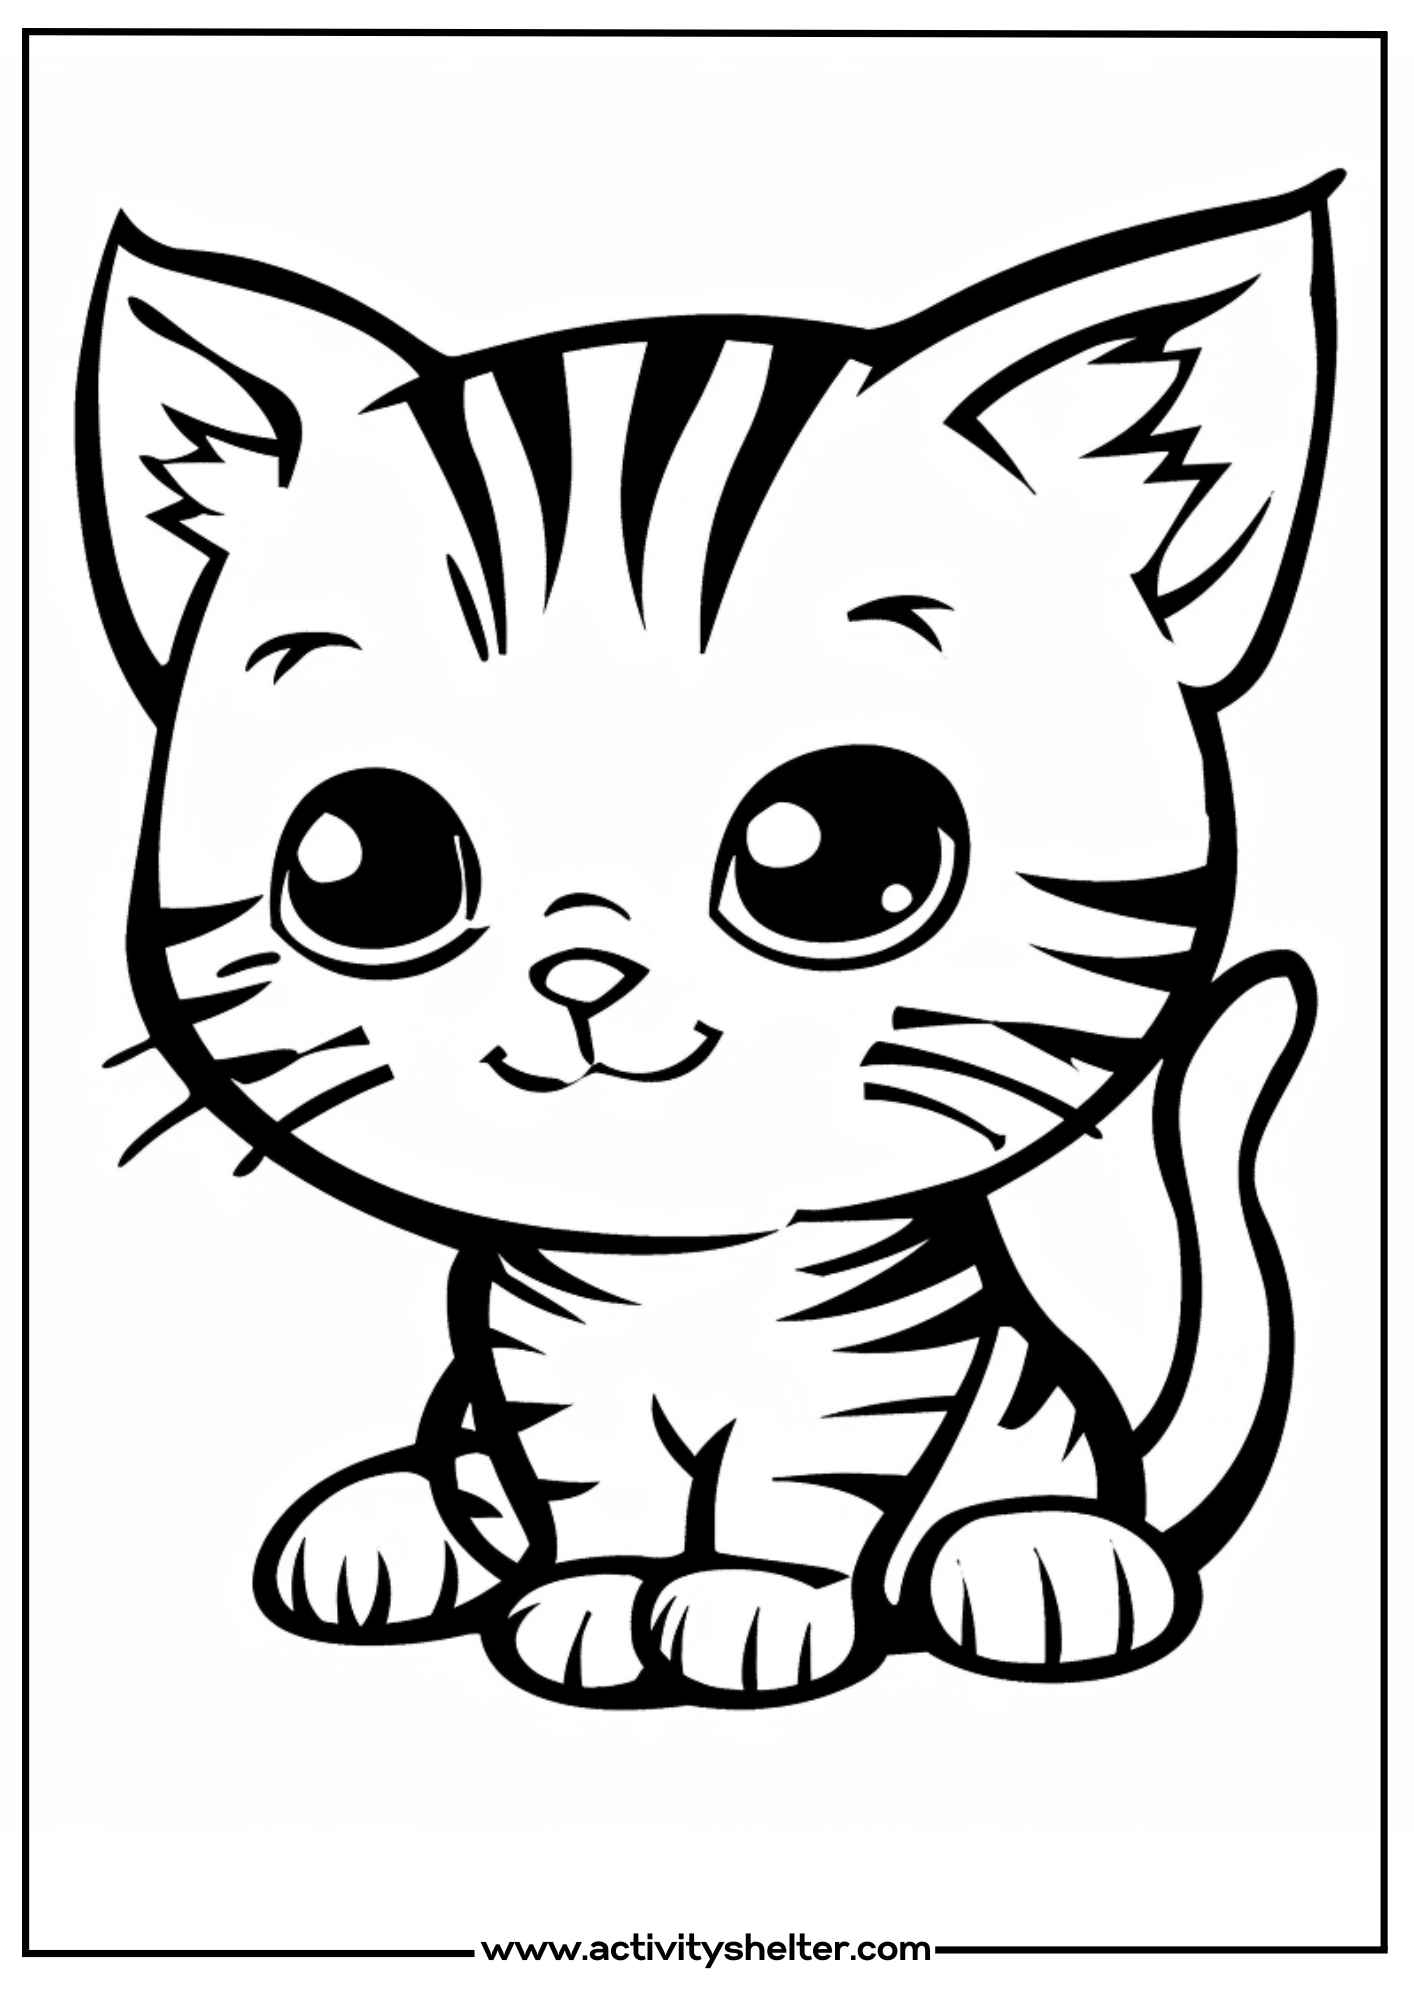 Realistic Kitten with Stripes Coloring Pages